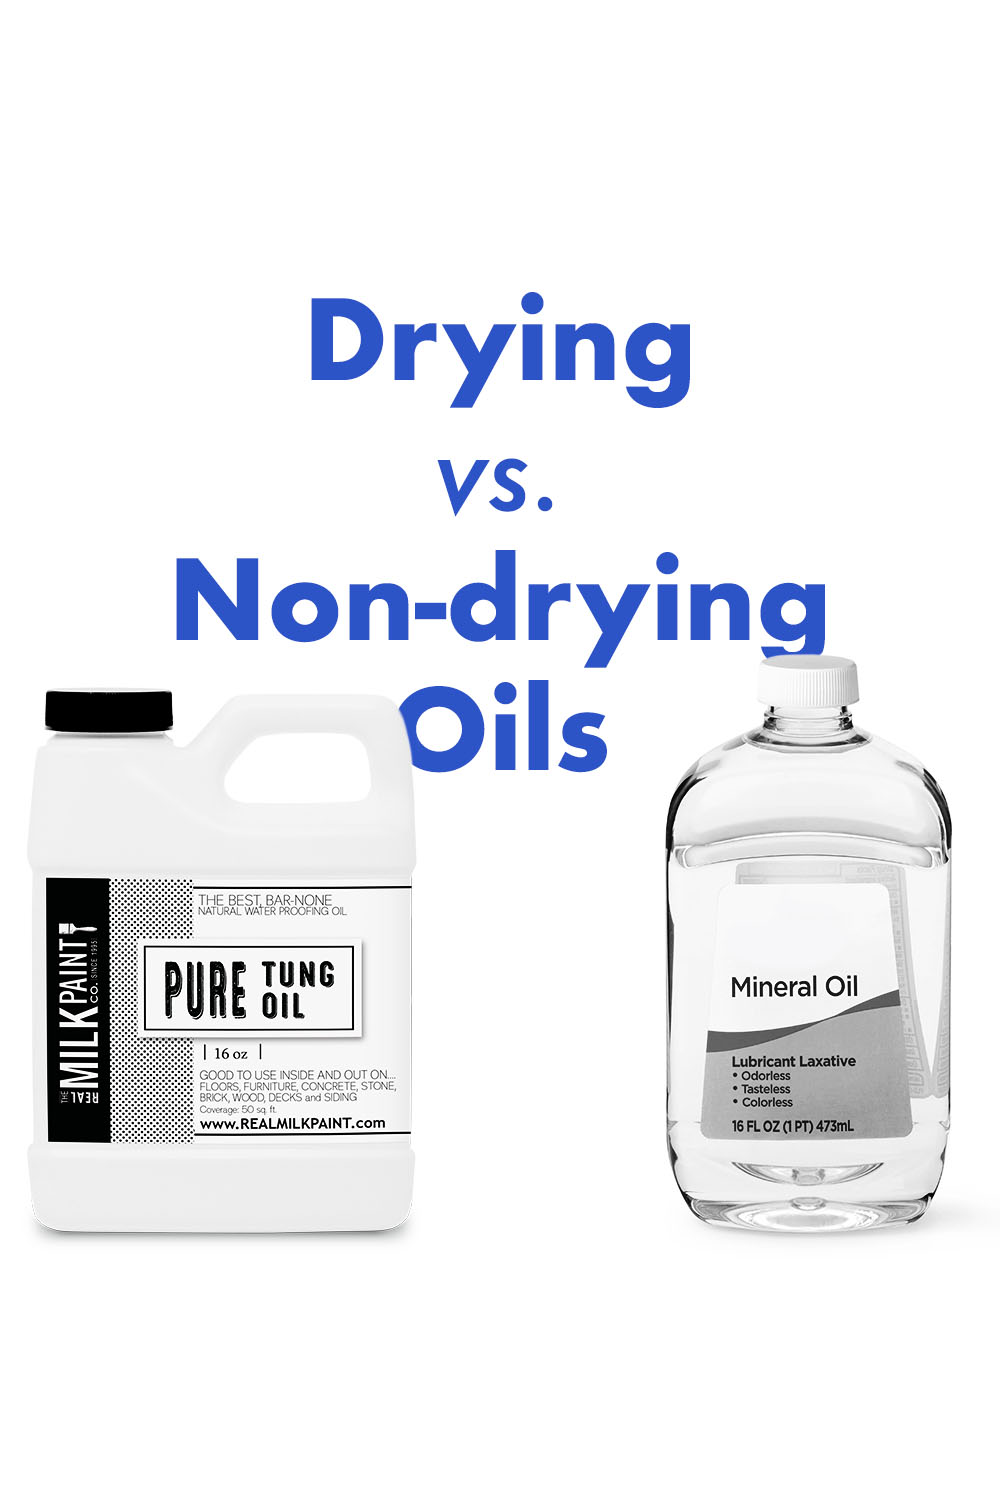 Difference Between Drying and Non-Drying Oil